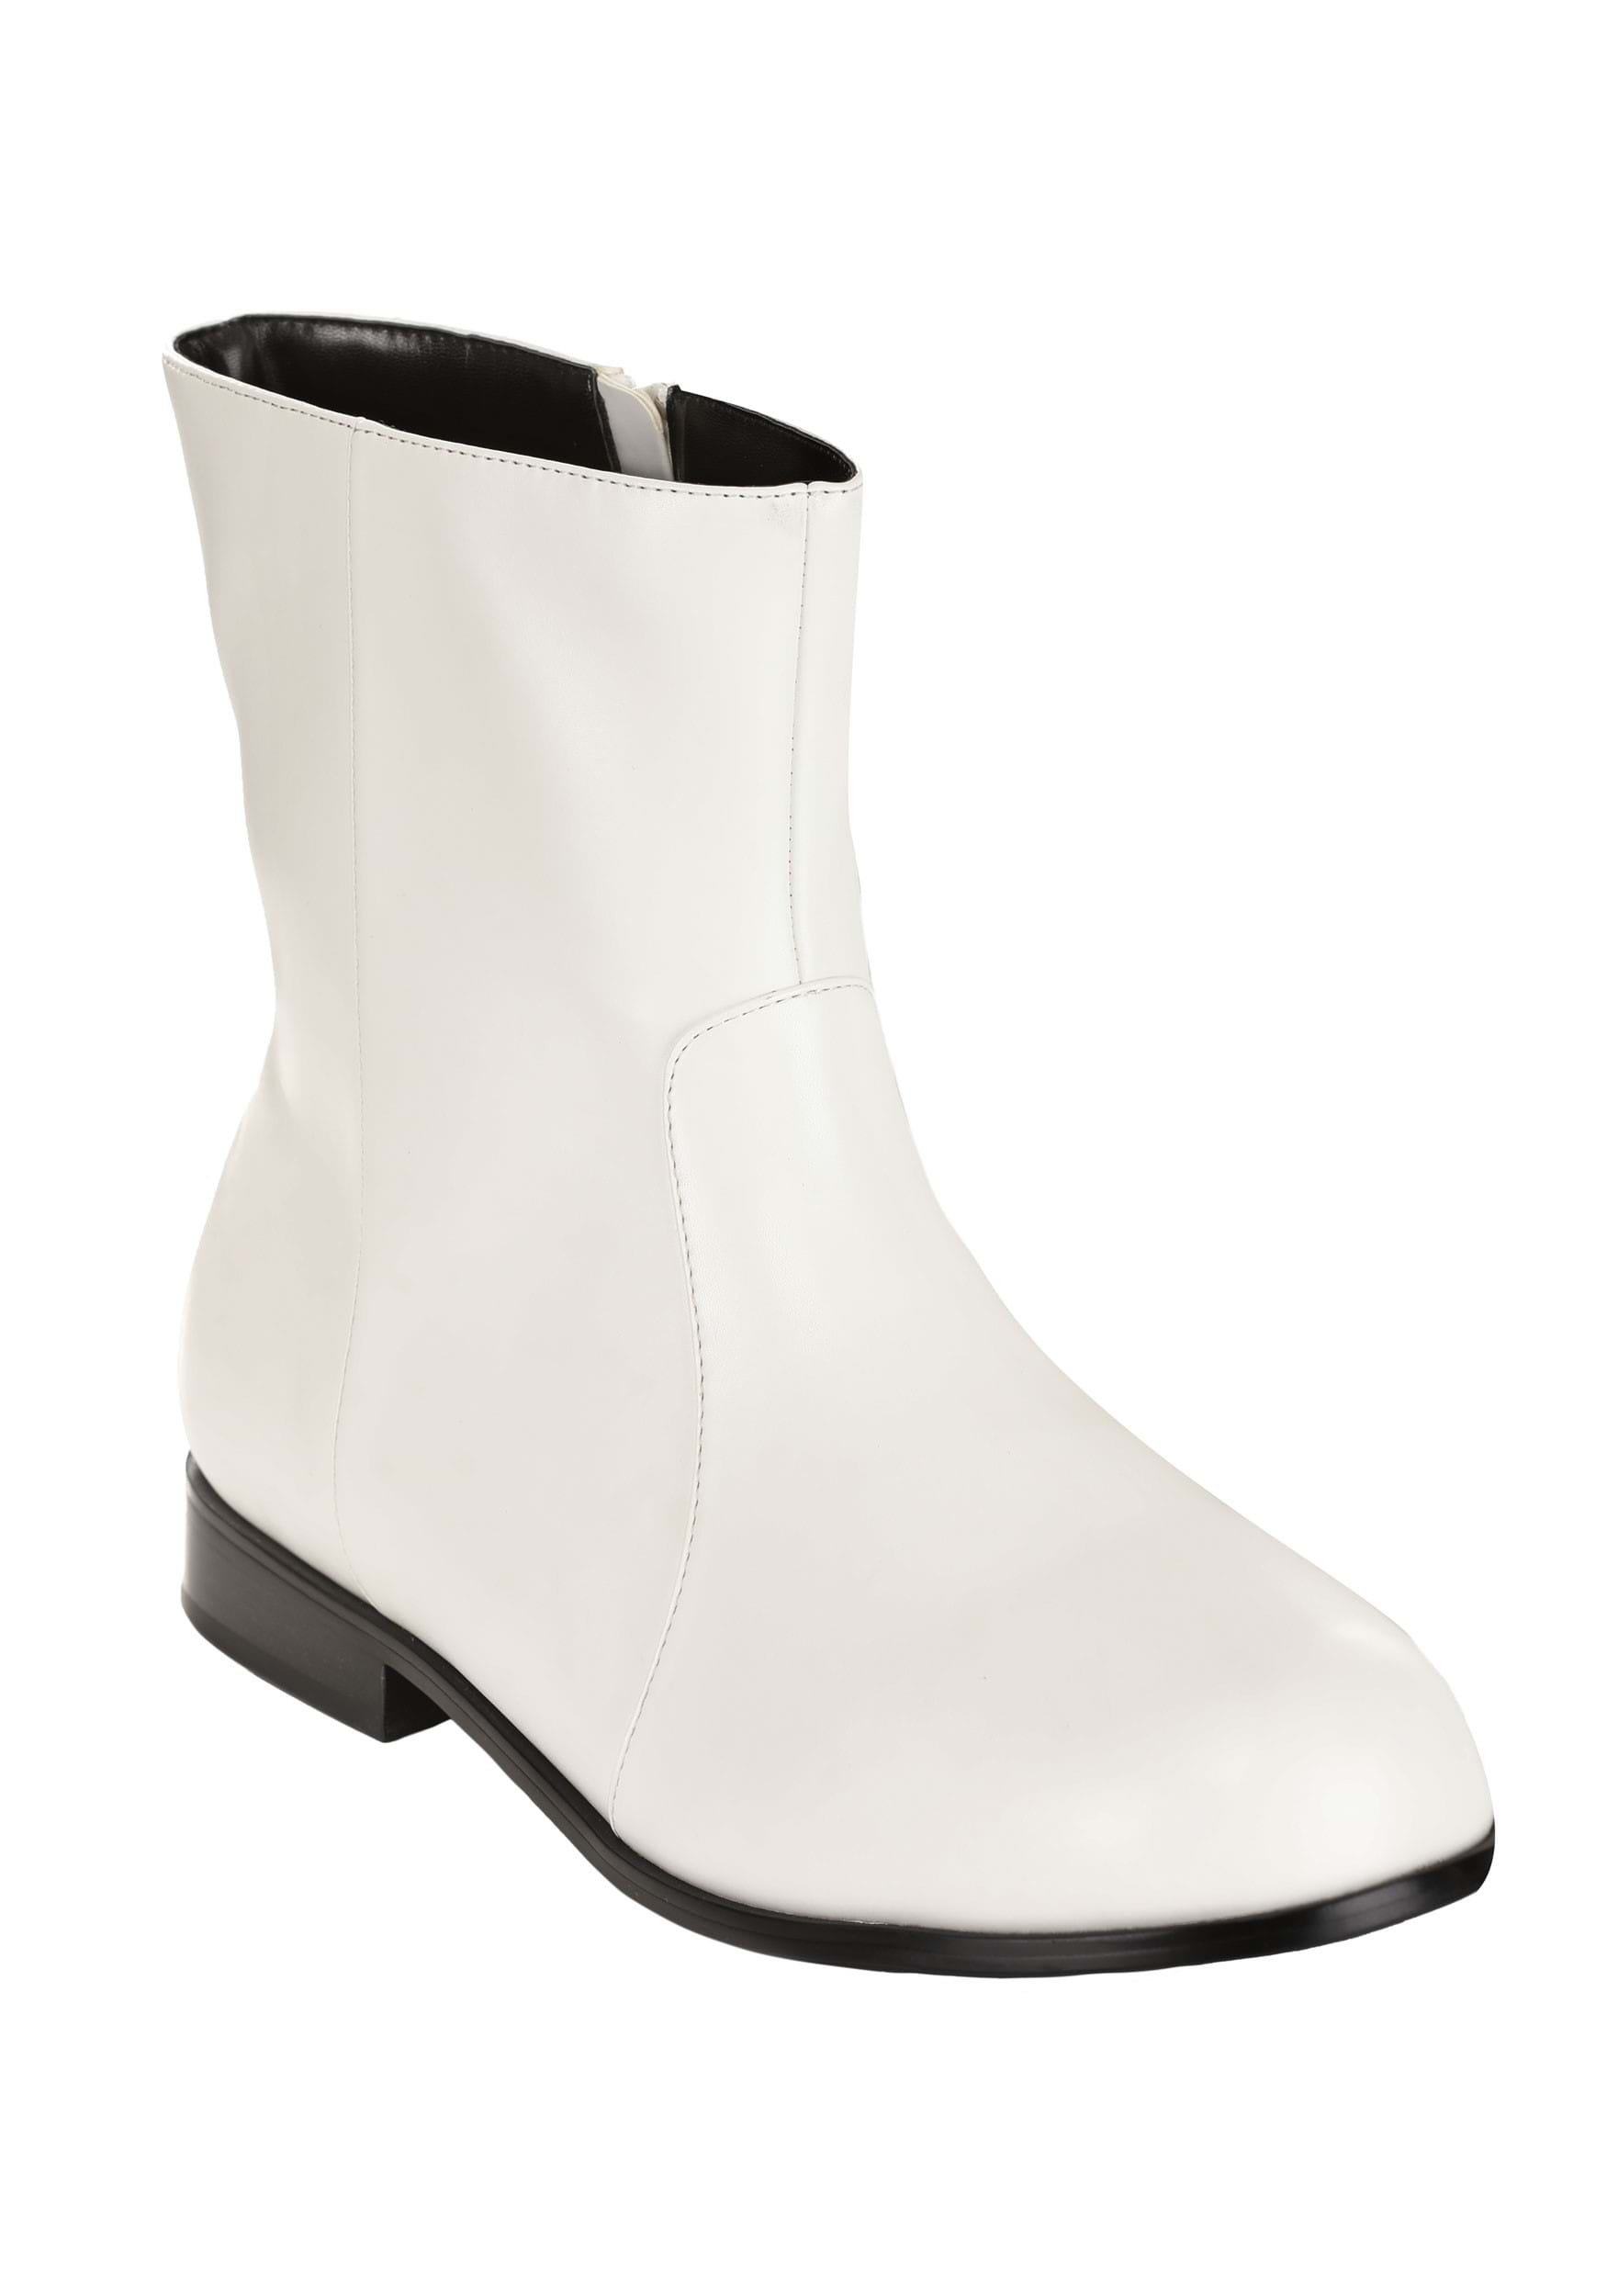 Introduction to White Boots